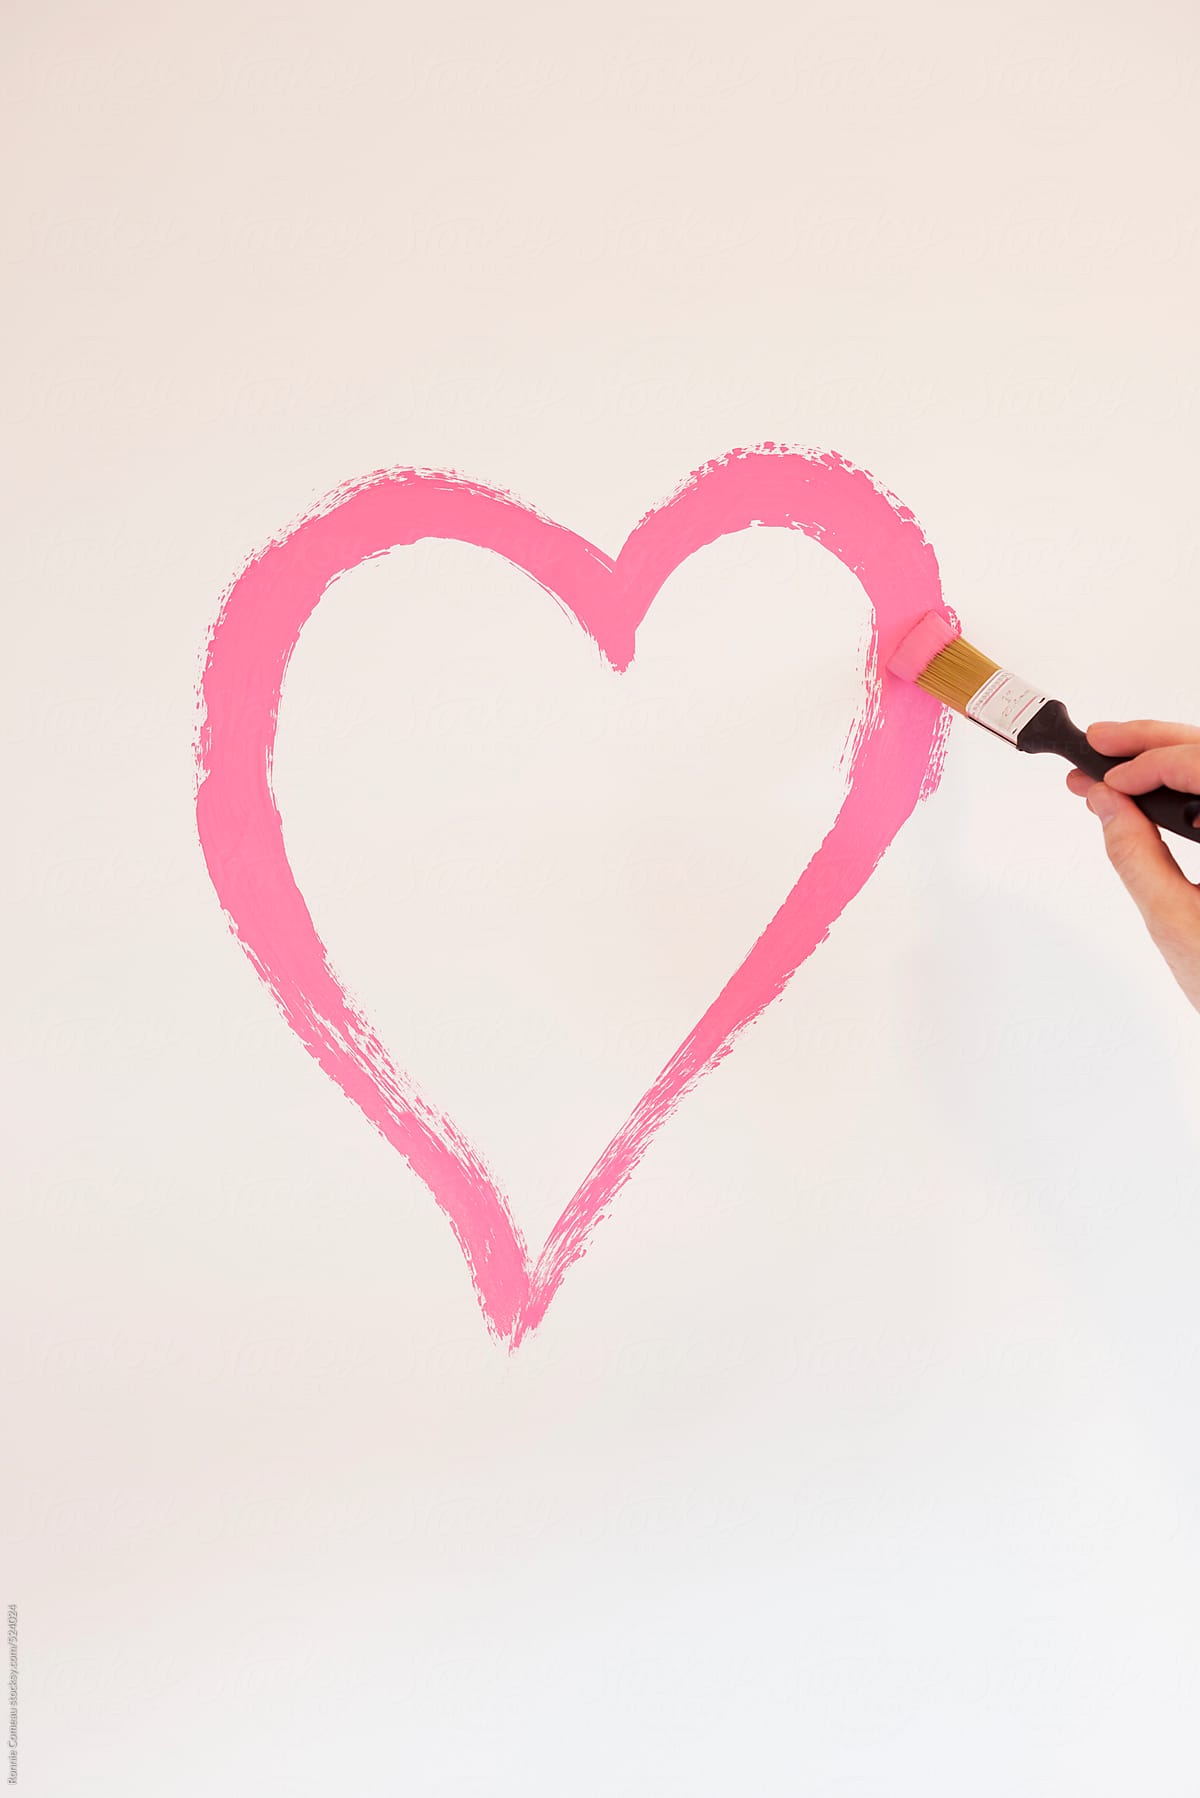 Painting A Heart On The Wall